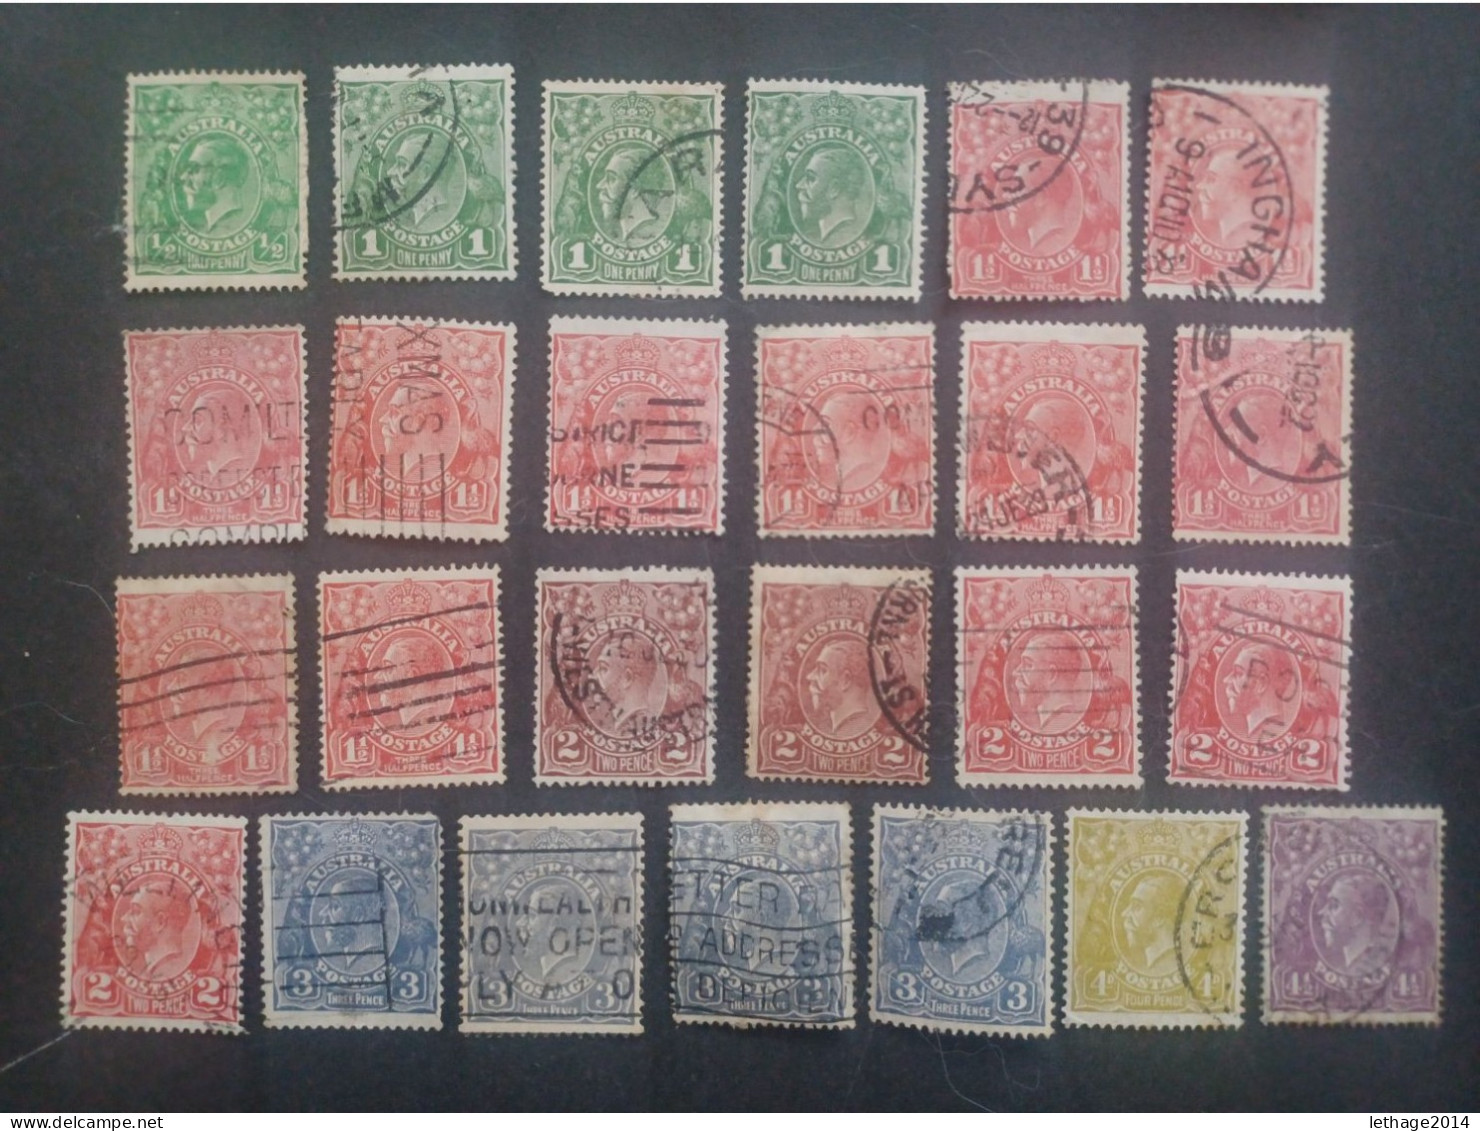 AUSTRALIA 1913 KANGOROO + KING GEORGE V + STOCK LOT MIX 33 SCANNERS MANY STAMPS FRAGMANT PERFIN - Collections